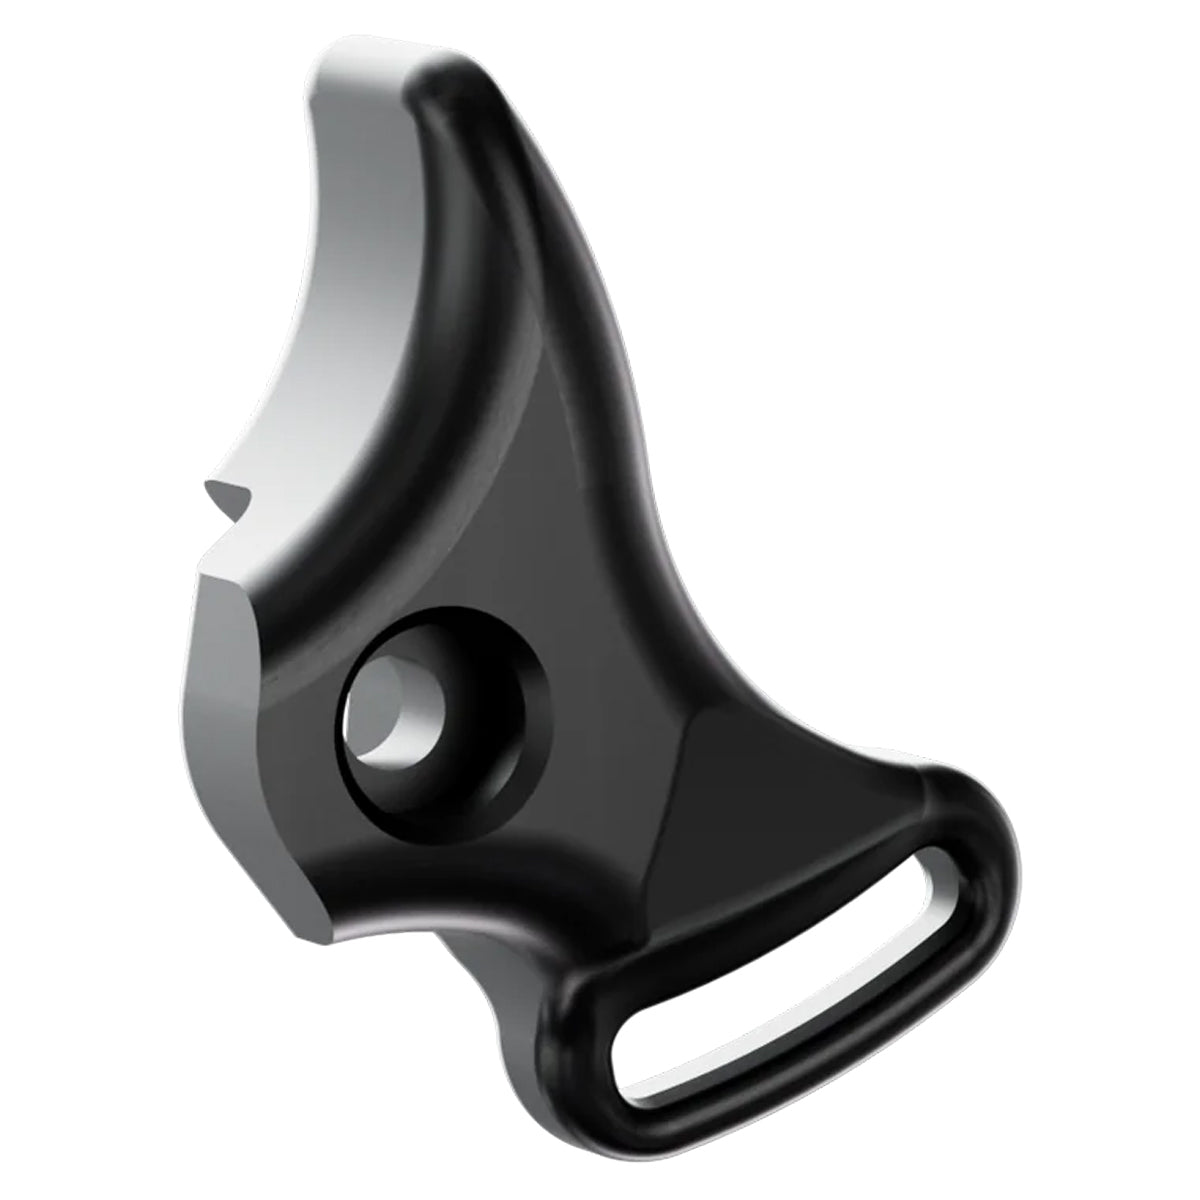 Ultraview Archery The Hinge 2 Finger Attachments in  by GOHUNT | Ultraview Archery - GOHUNT Shop